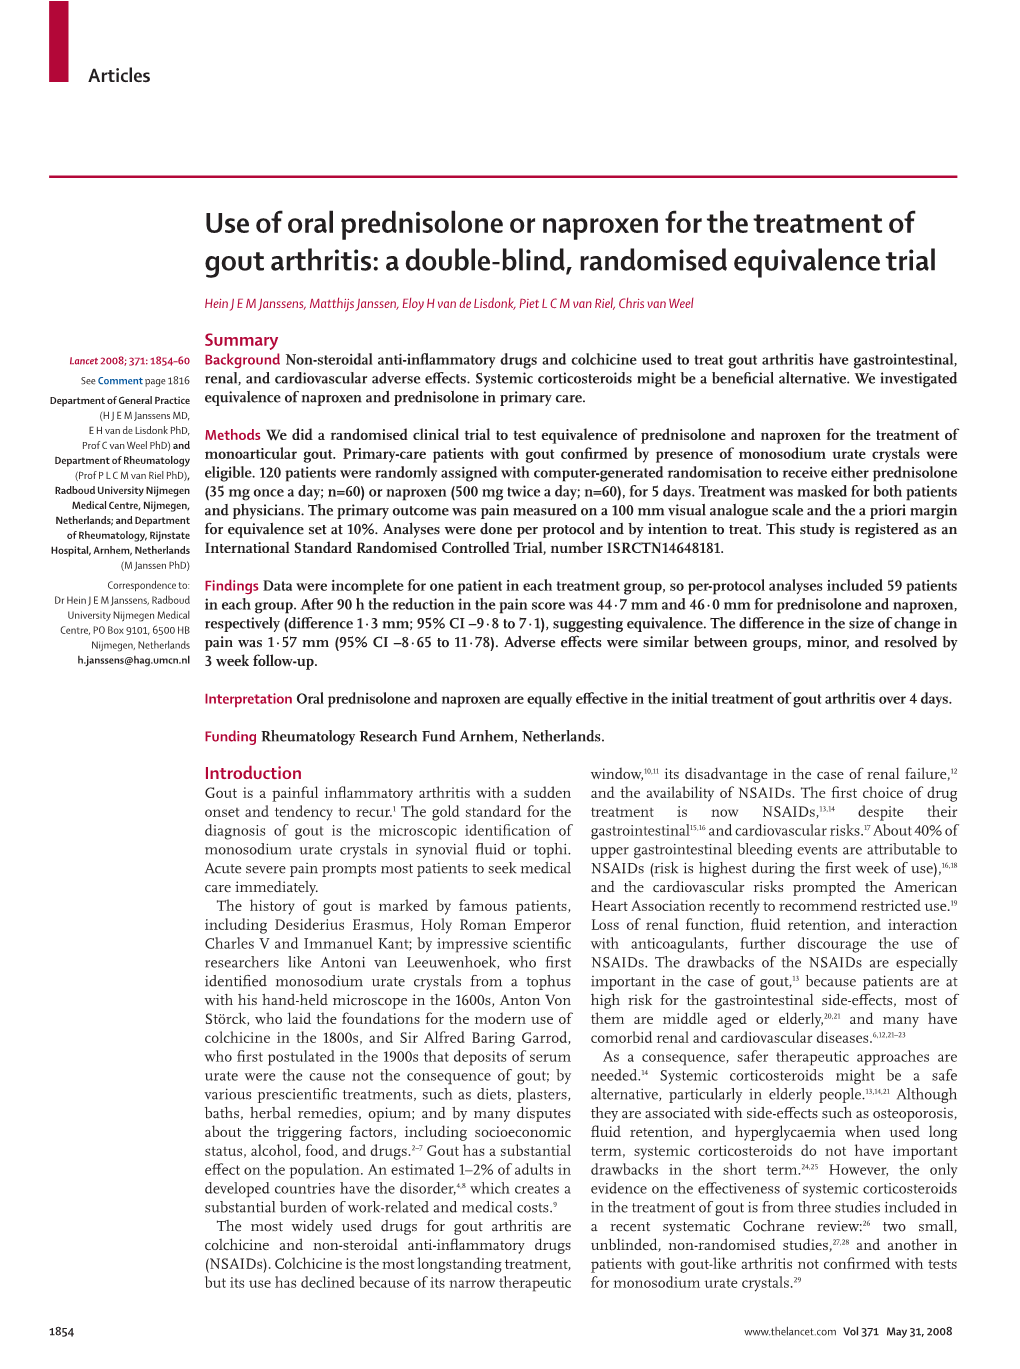 Use of Oral Prednisolone Or Naproxen for the Treatment of Gout Arthritis: a Double-Blind, Randomised Equivalence Trial